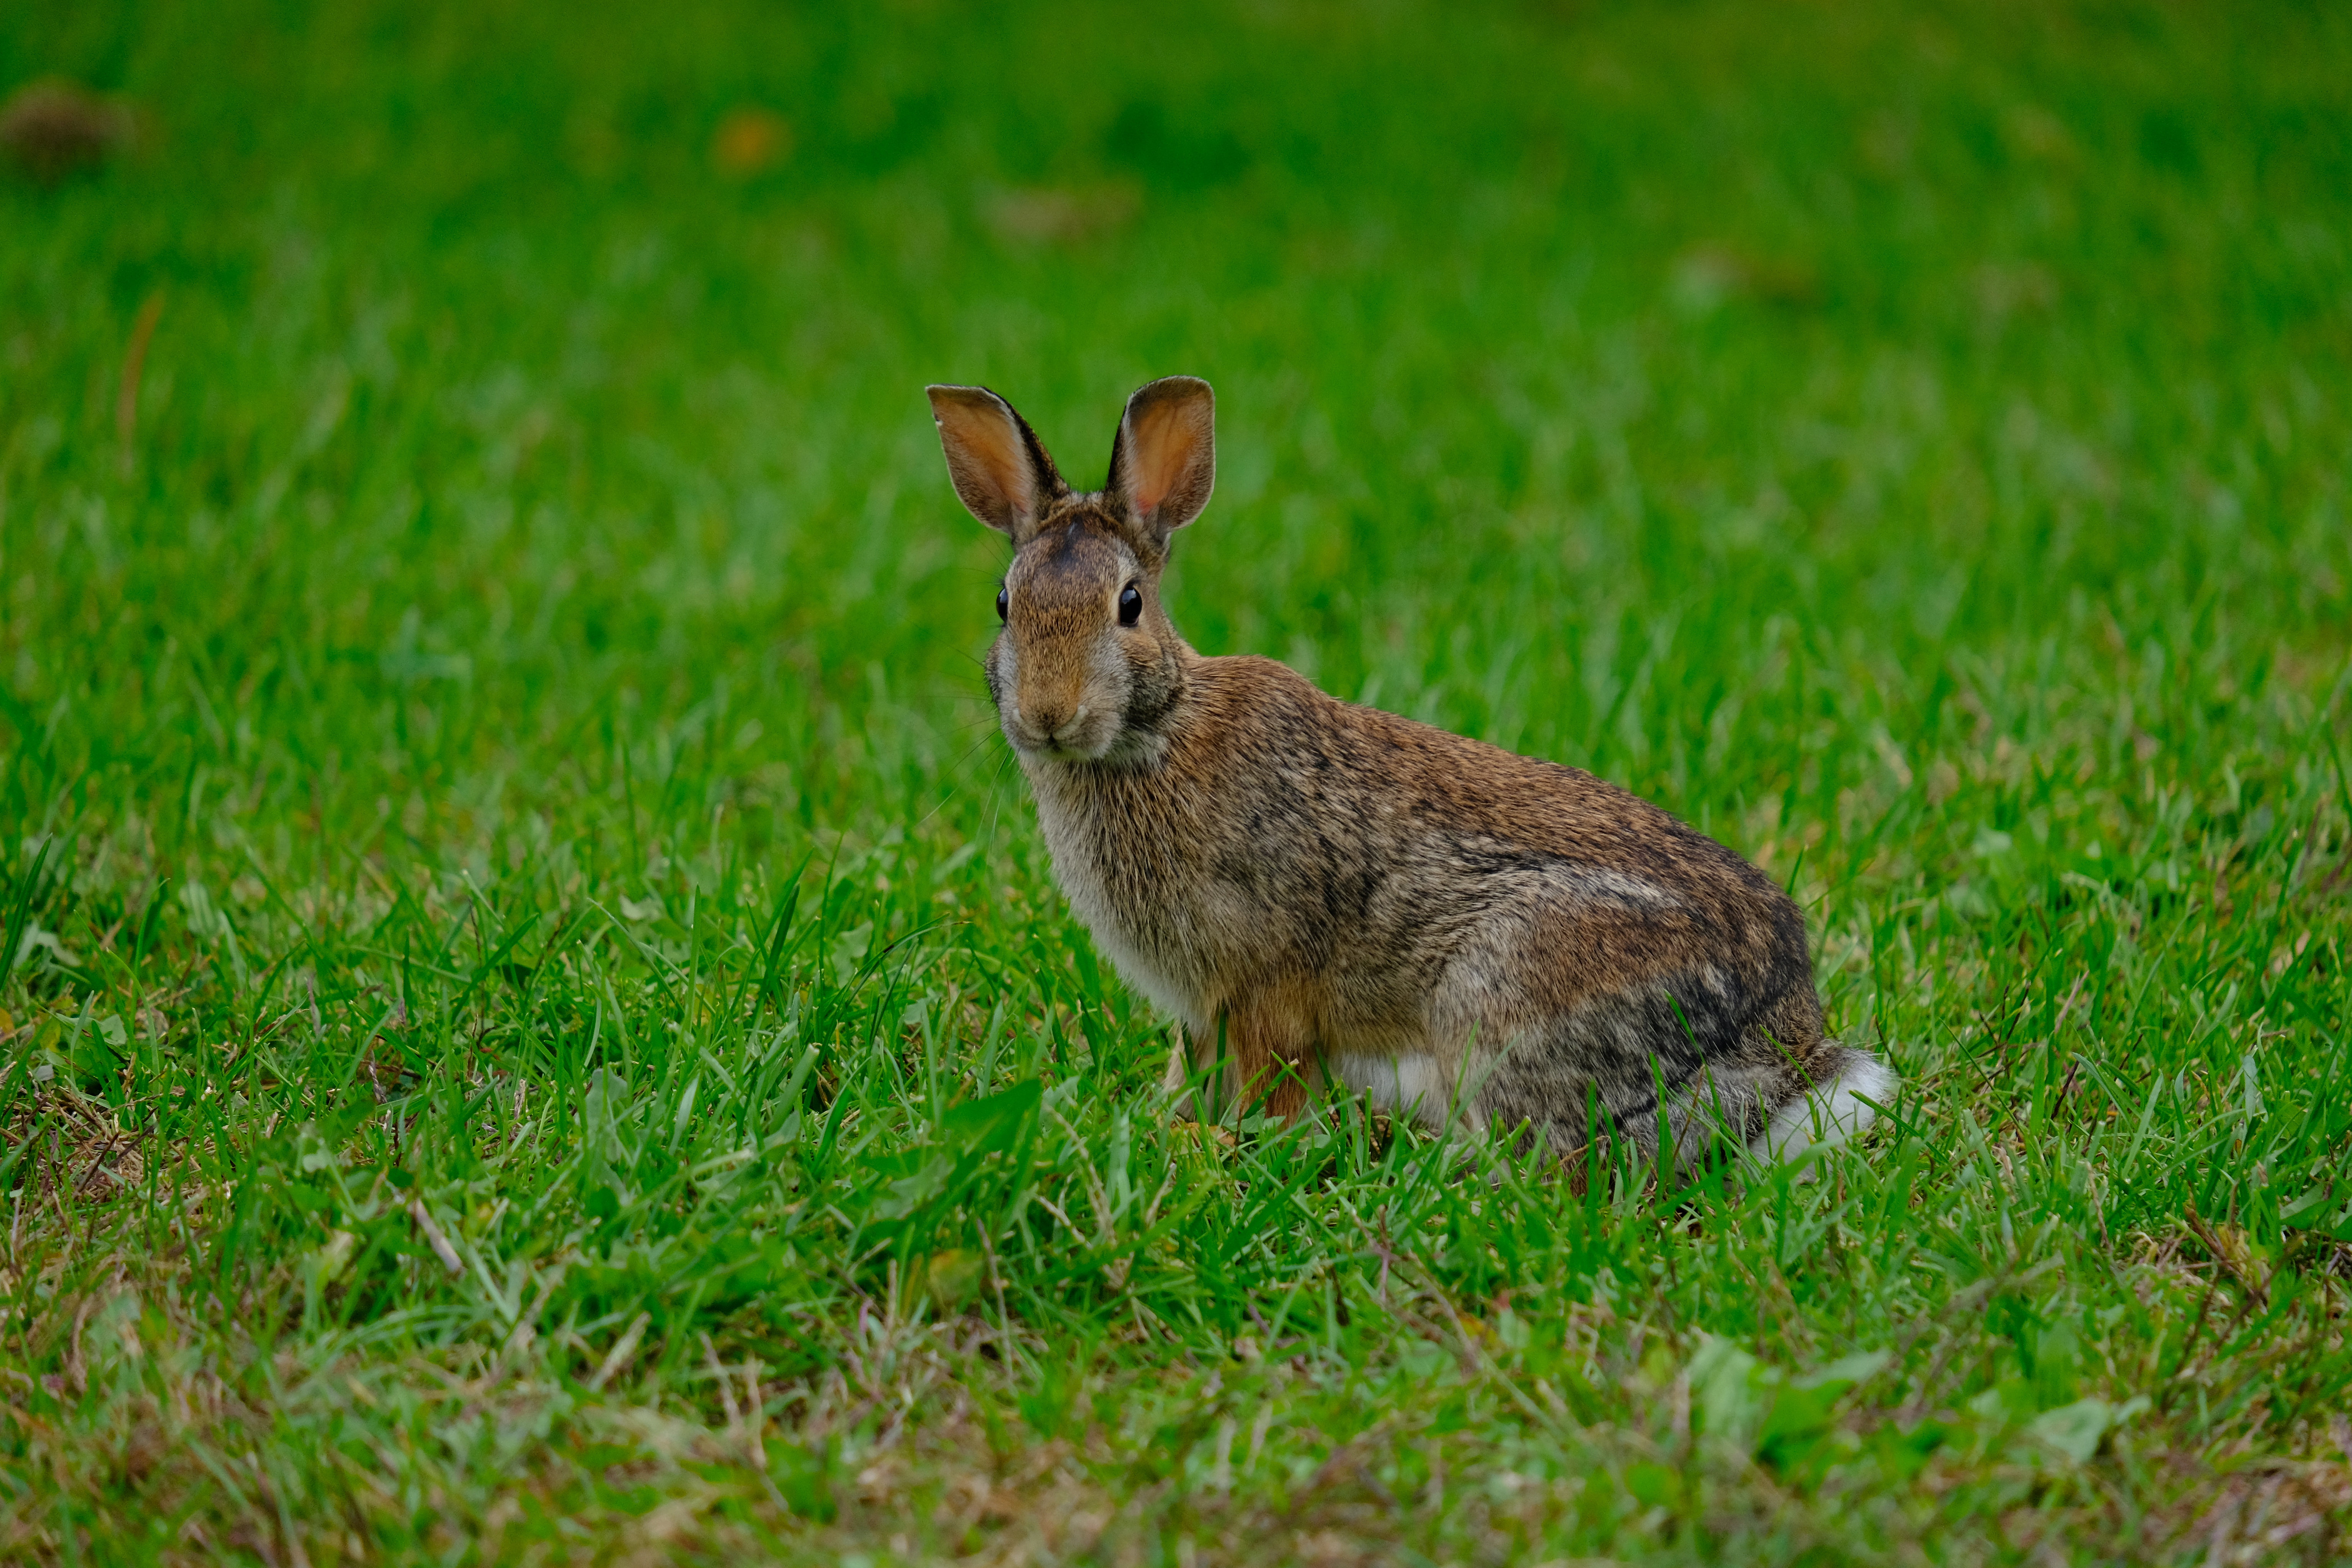 126122 Screensavers and Wallpapers Rabbit for phone. Download animals, grass, animal, rabbit, hare pictures for free